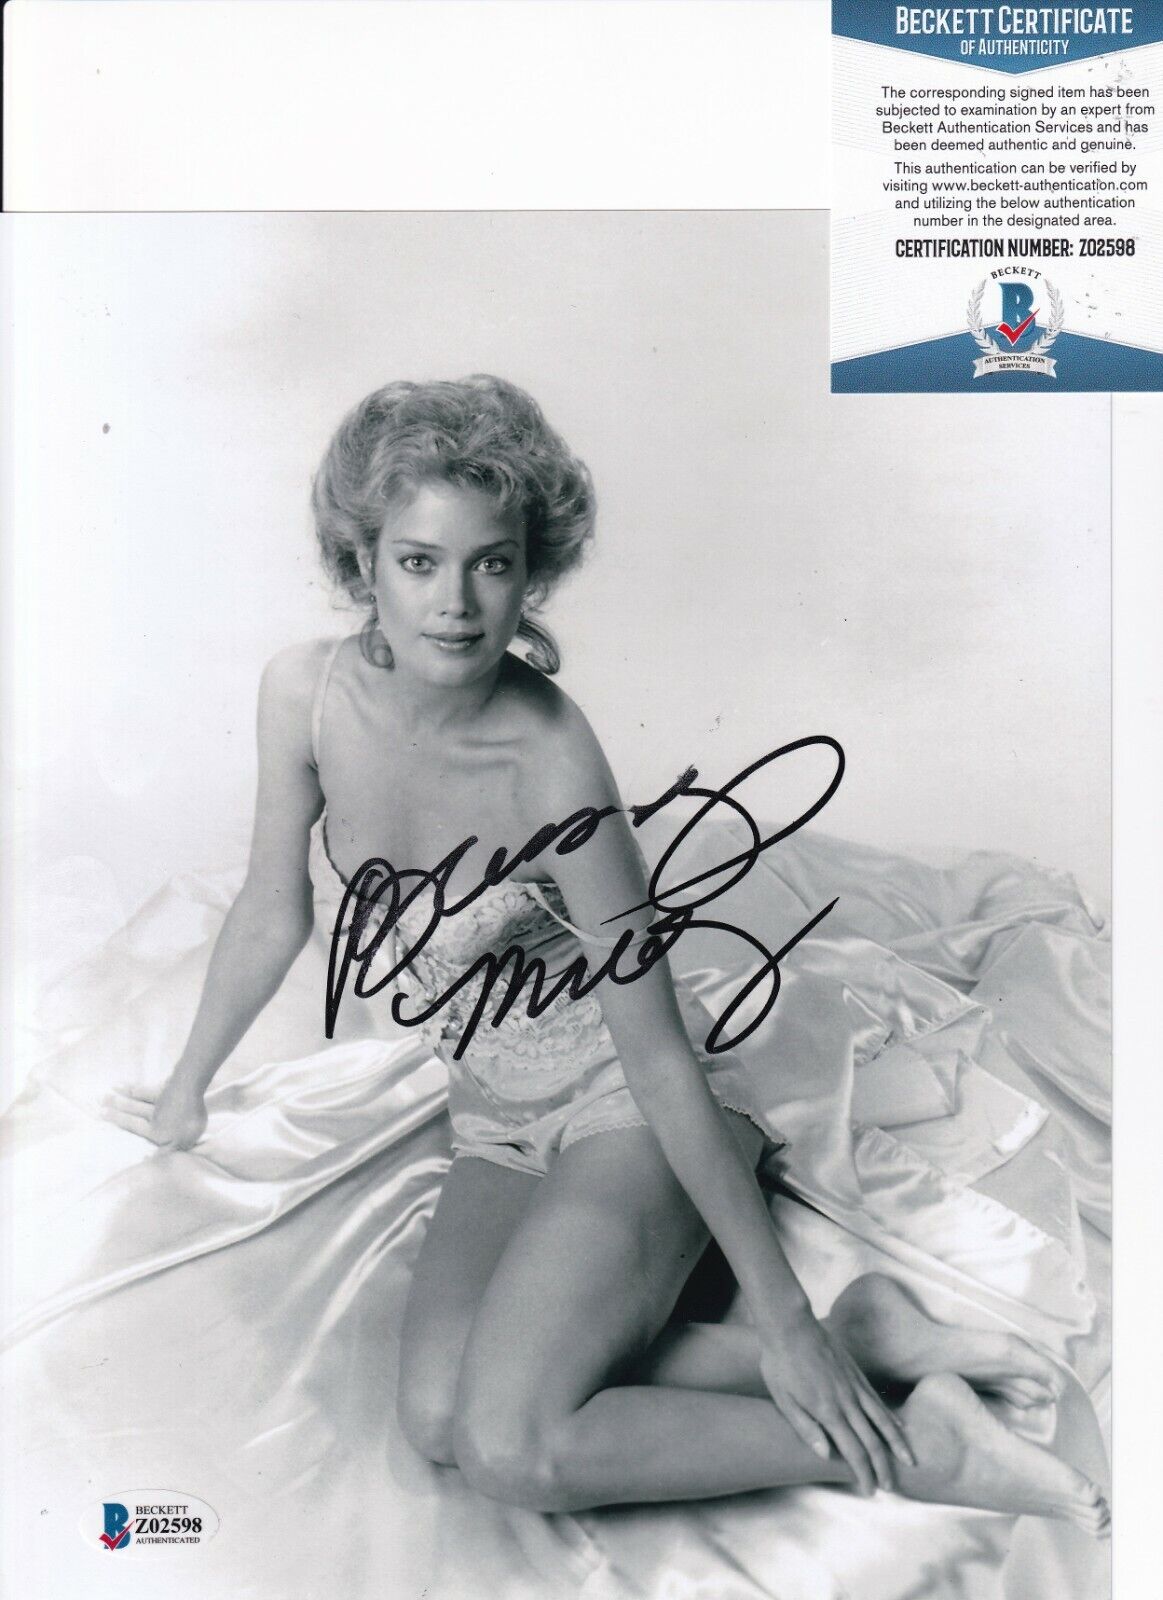 MELODY ANDERSON signed (THE FLASH) Gordon Firewalker 8X10 Photo Poster painting BECKETT Z02598